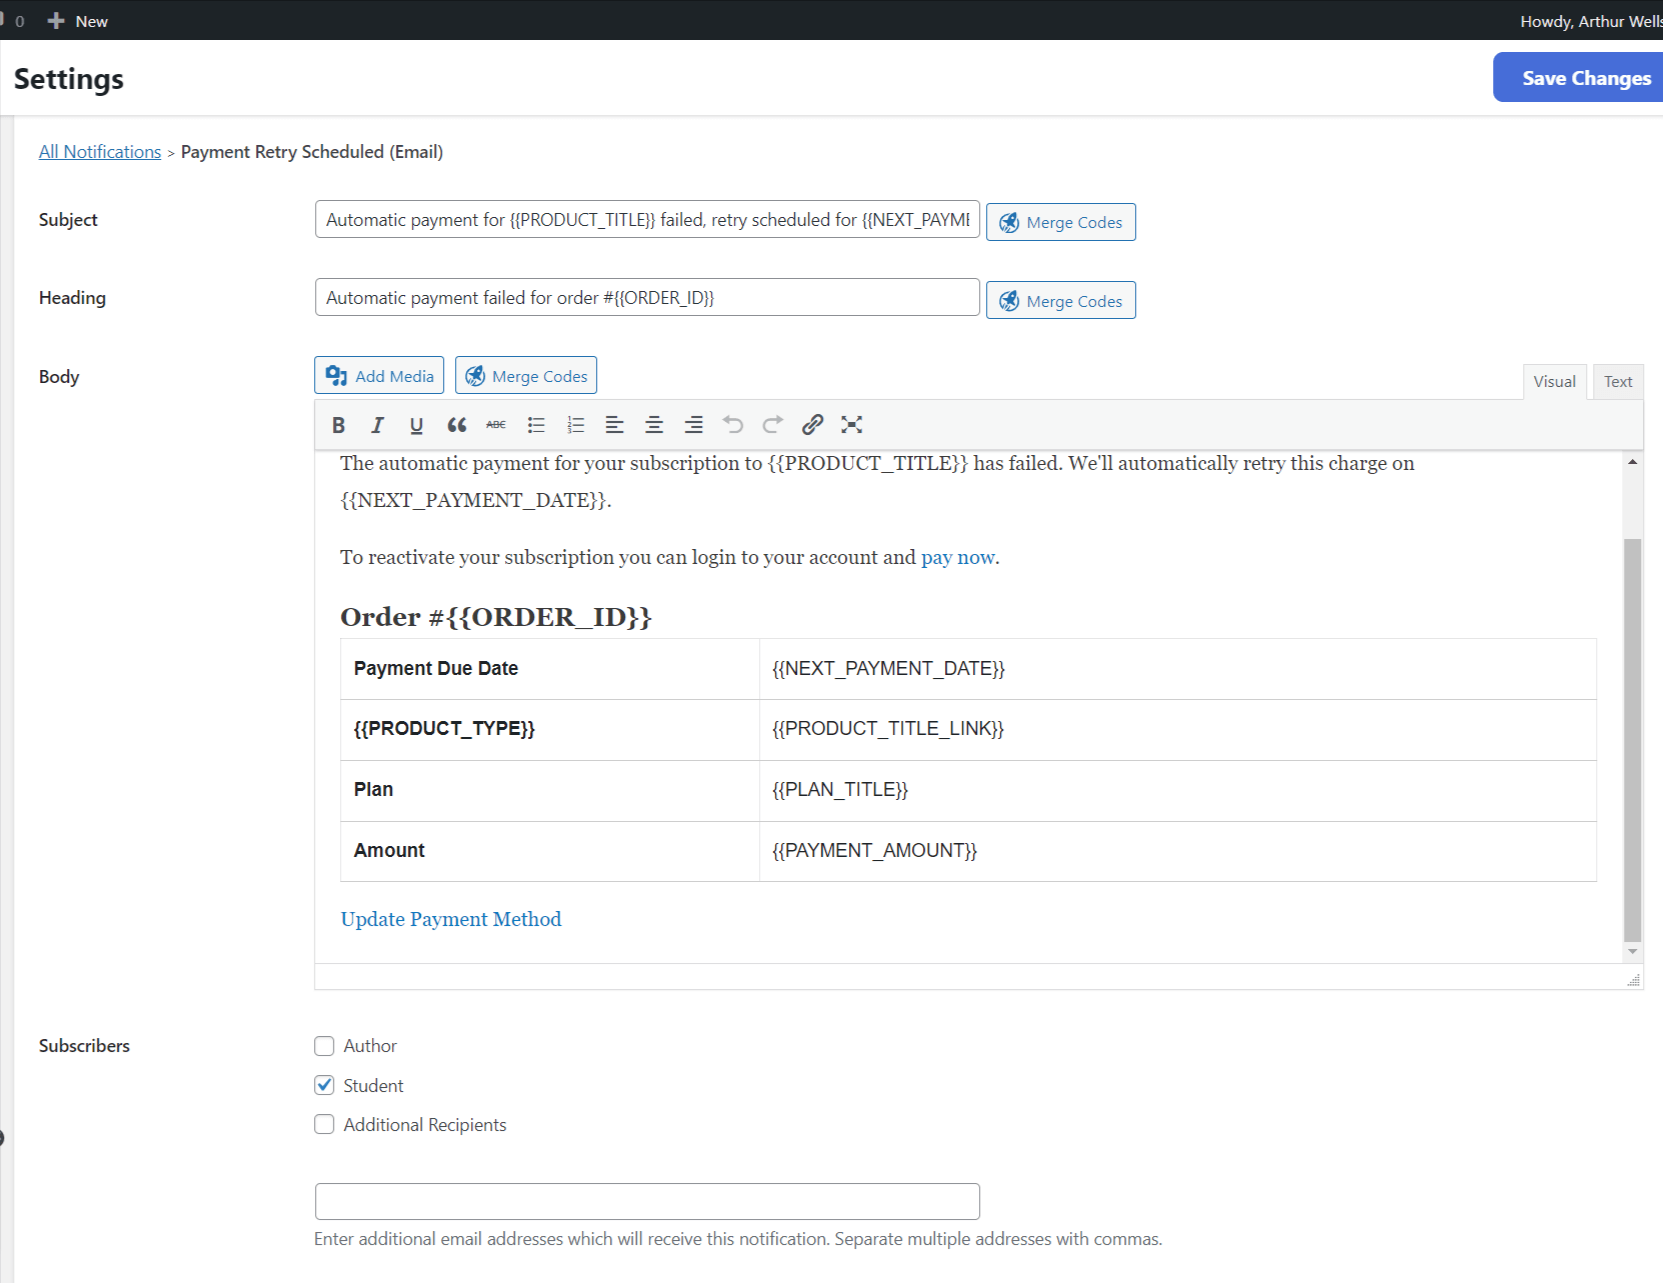 LifterLMS Notification Payment Retry Scheduled
